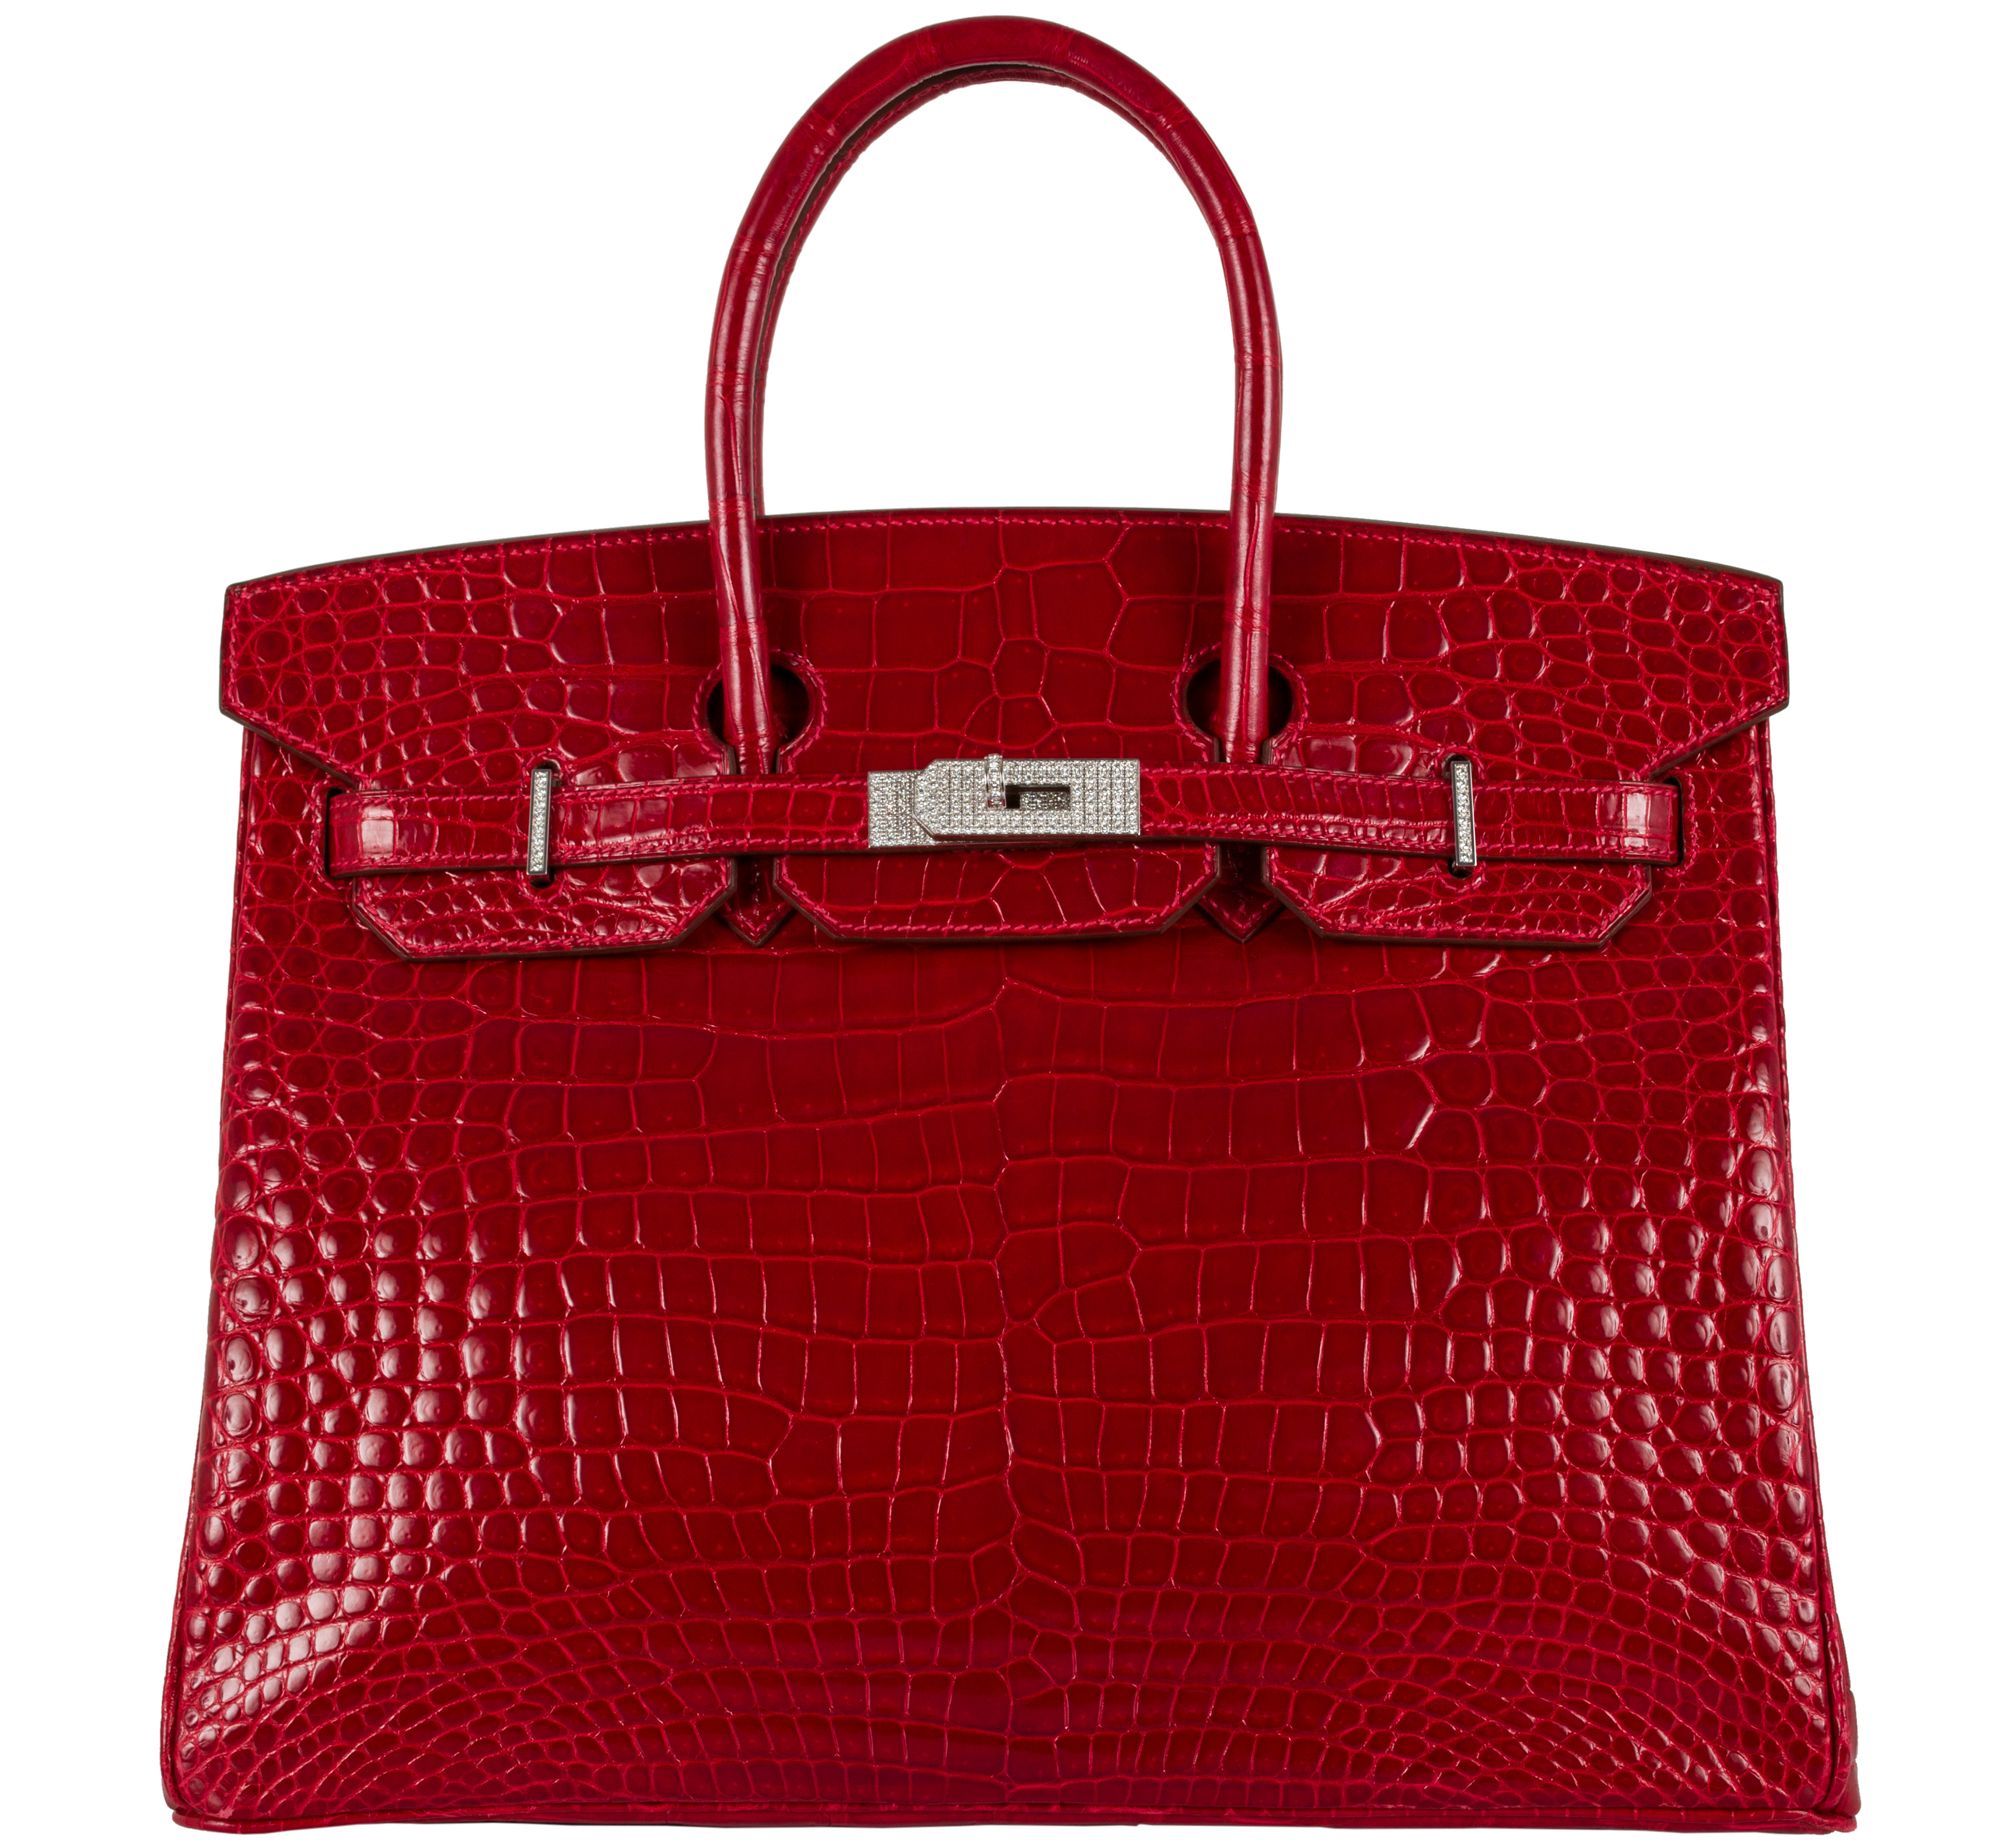 Most Expensive Birkin Sells for $298,000